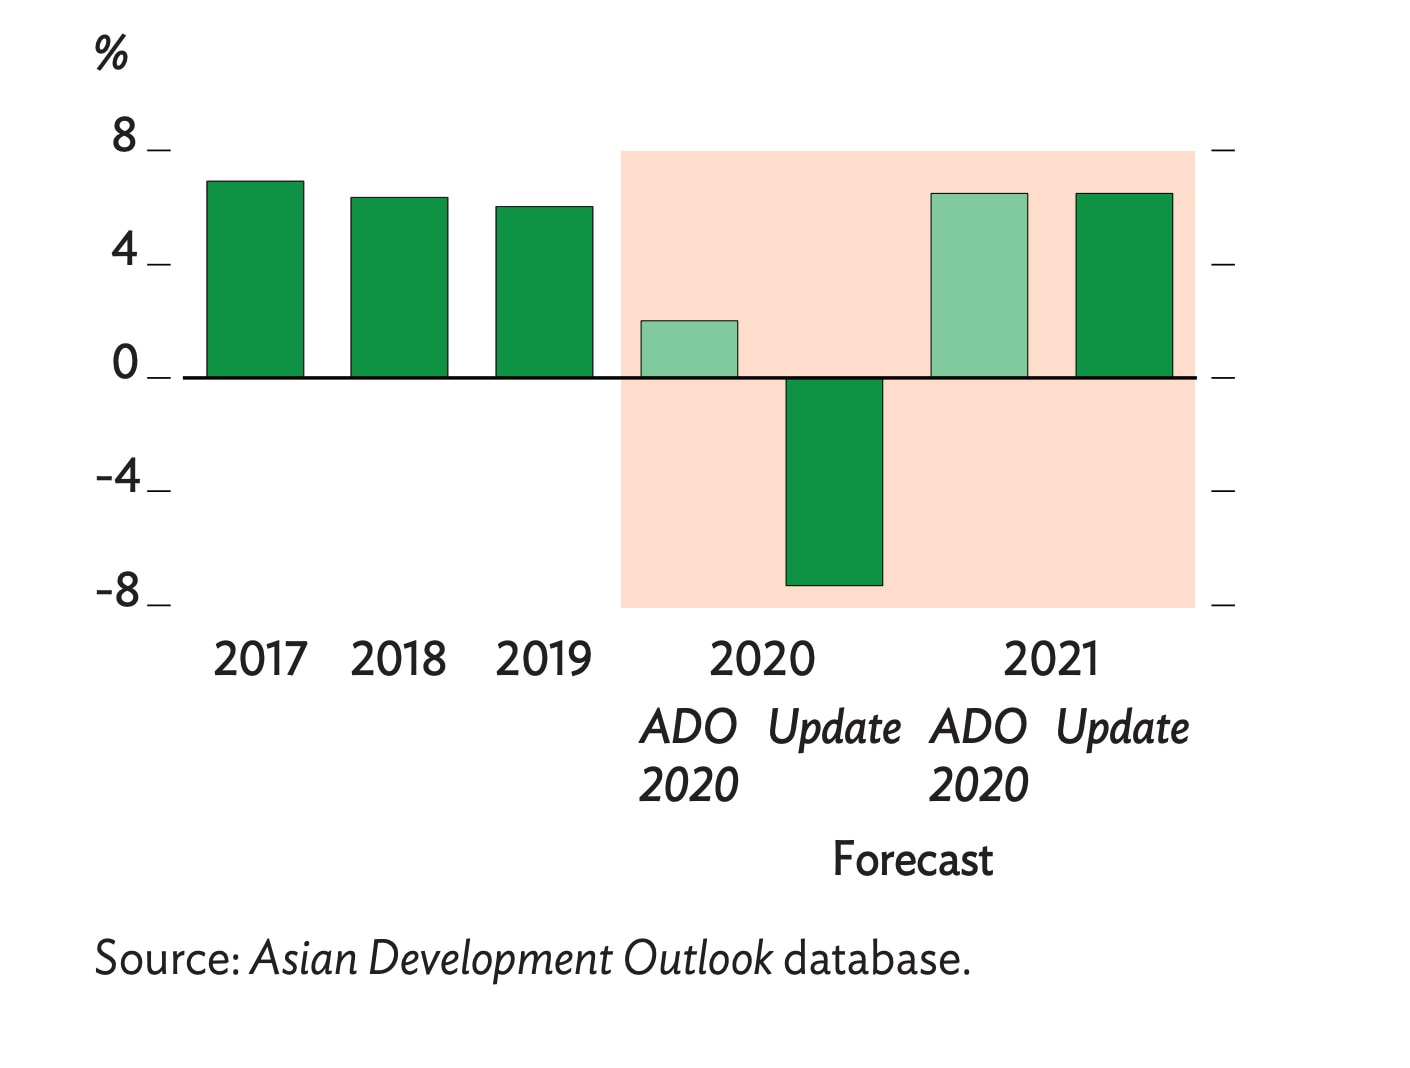 PH economy likely to see &#39;deeper decline&#39; in 2020 before recovery next year: ADB 2